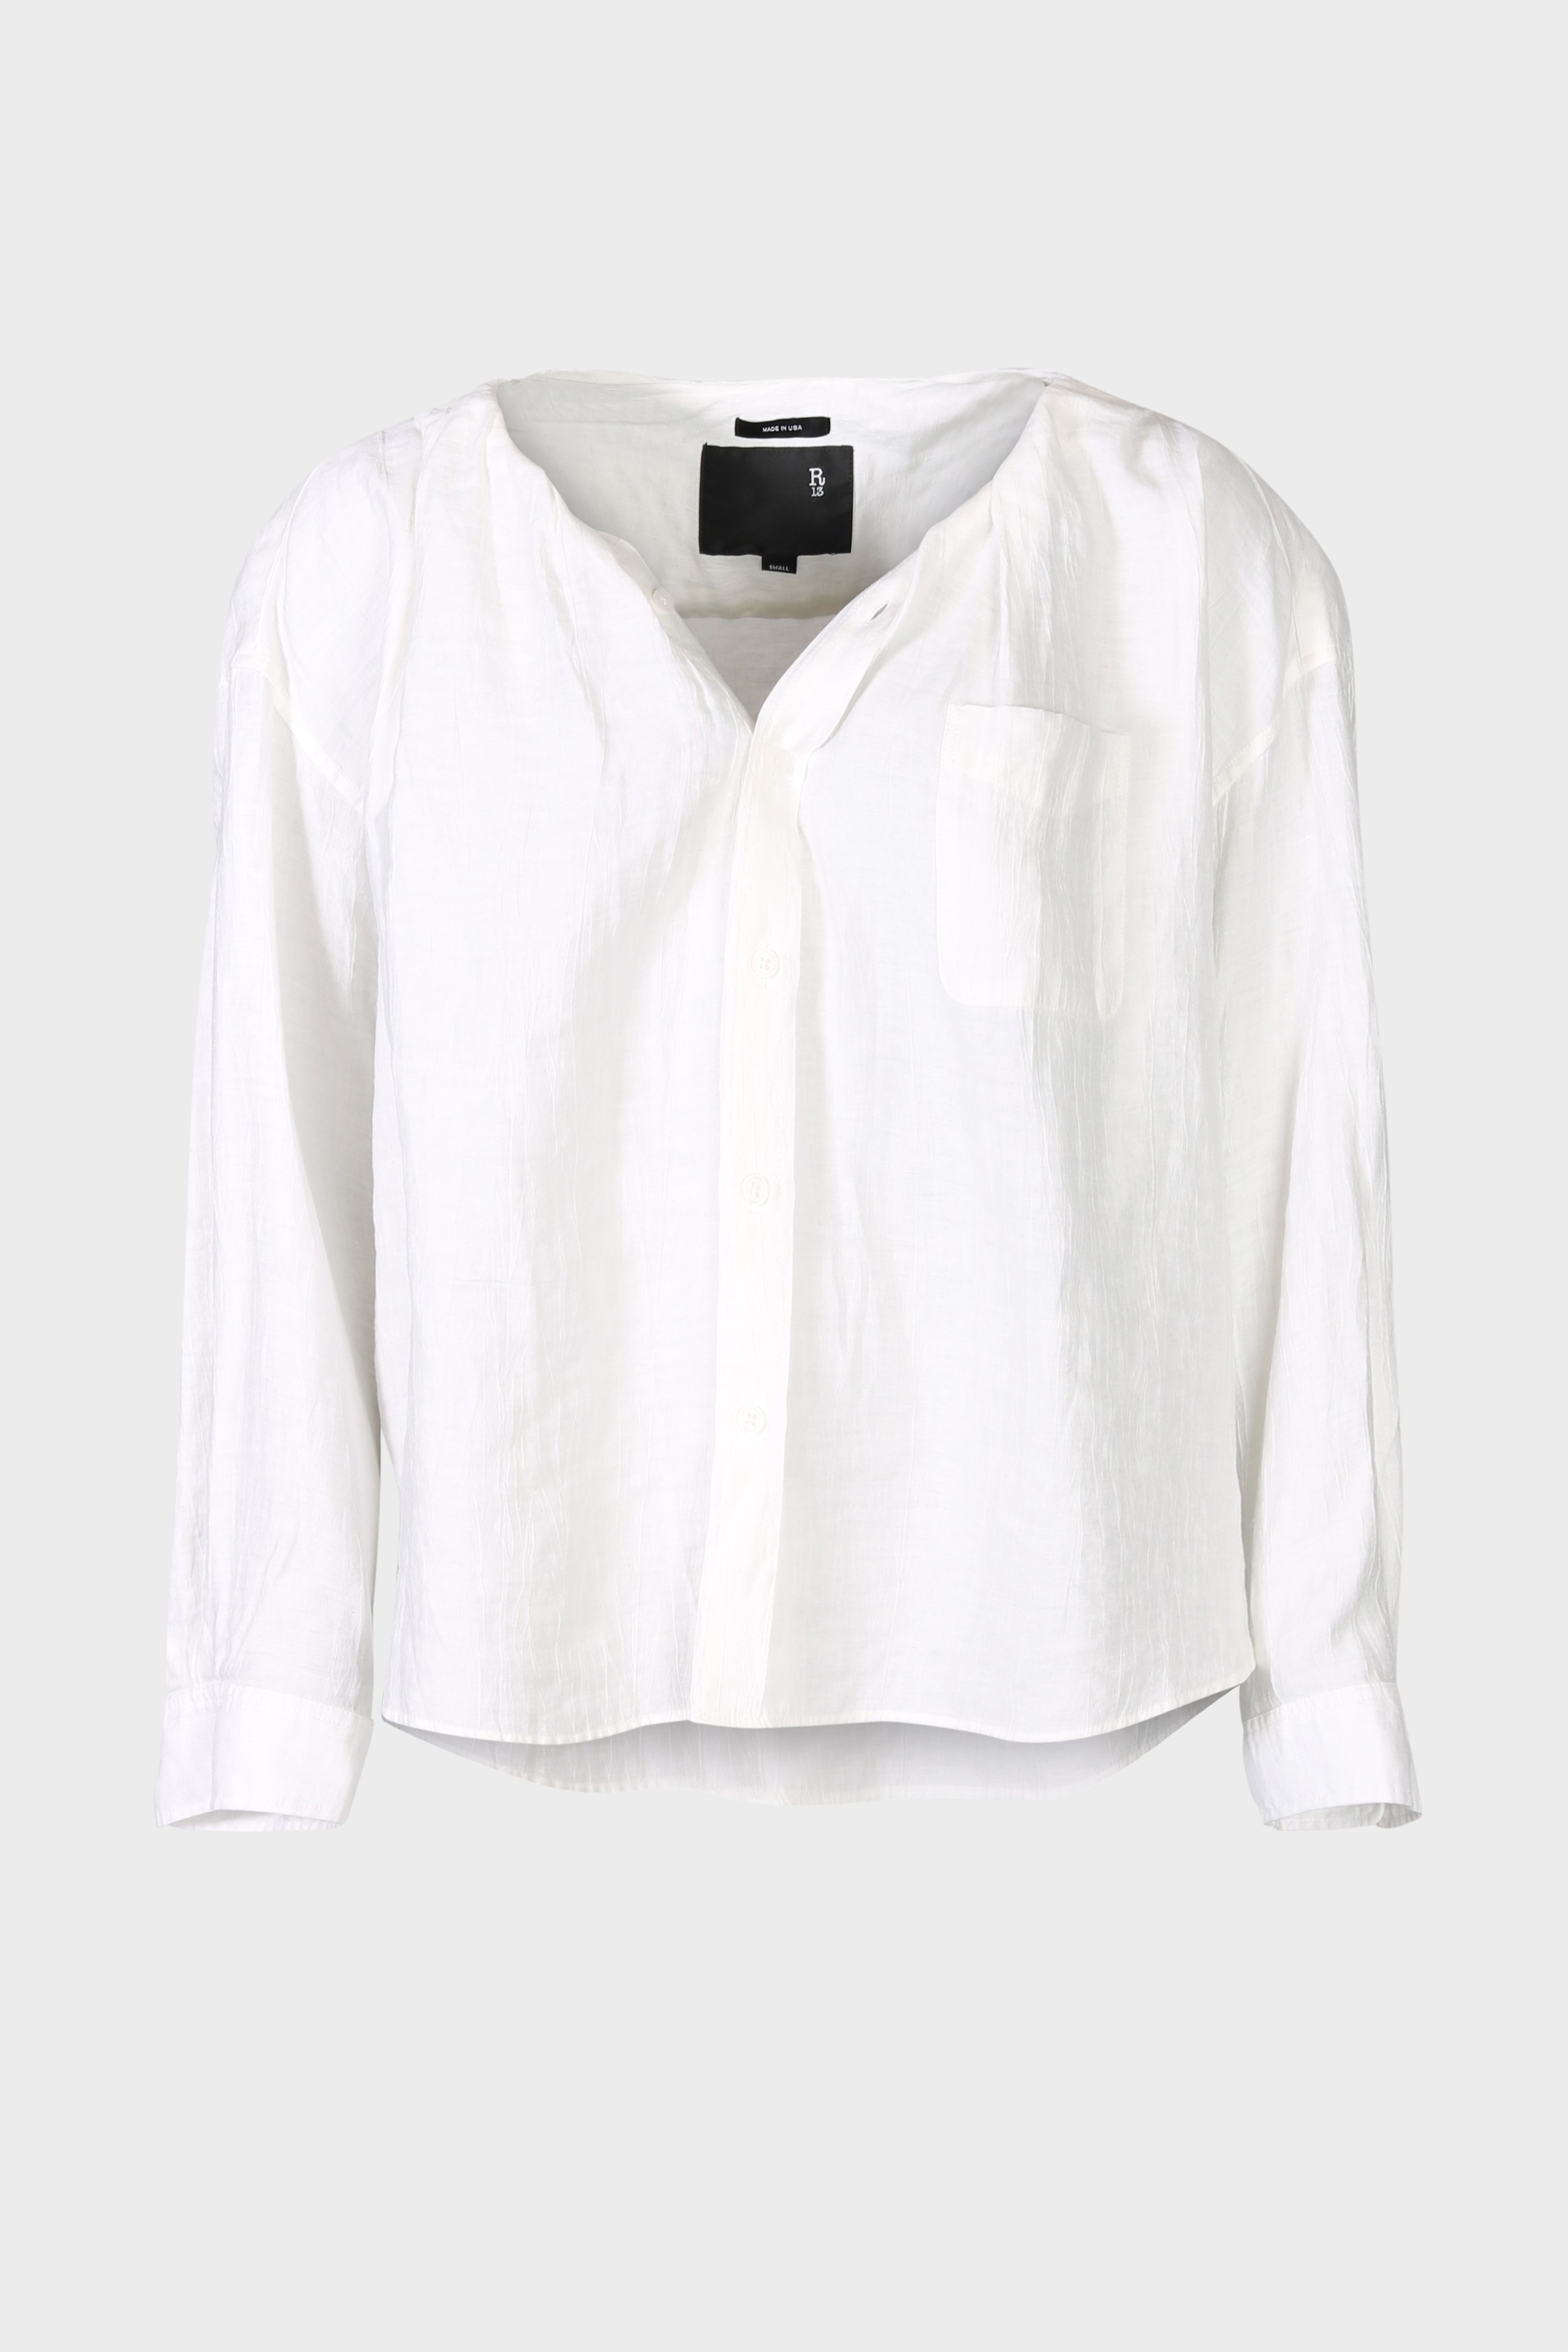 R13 Twisted Neck Shirt in White